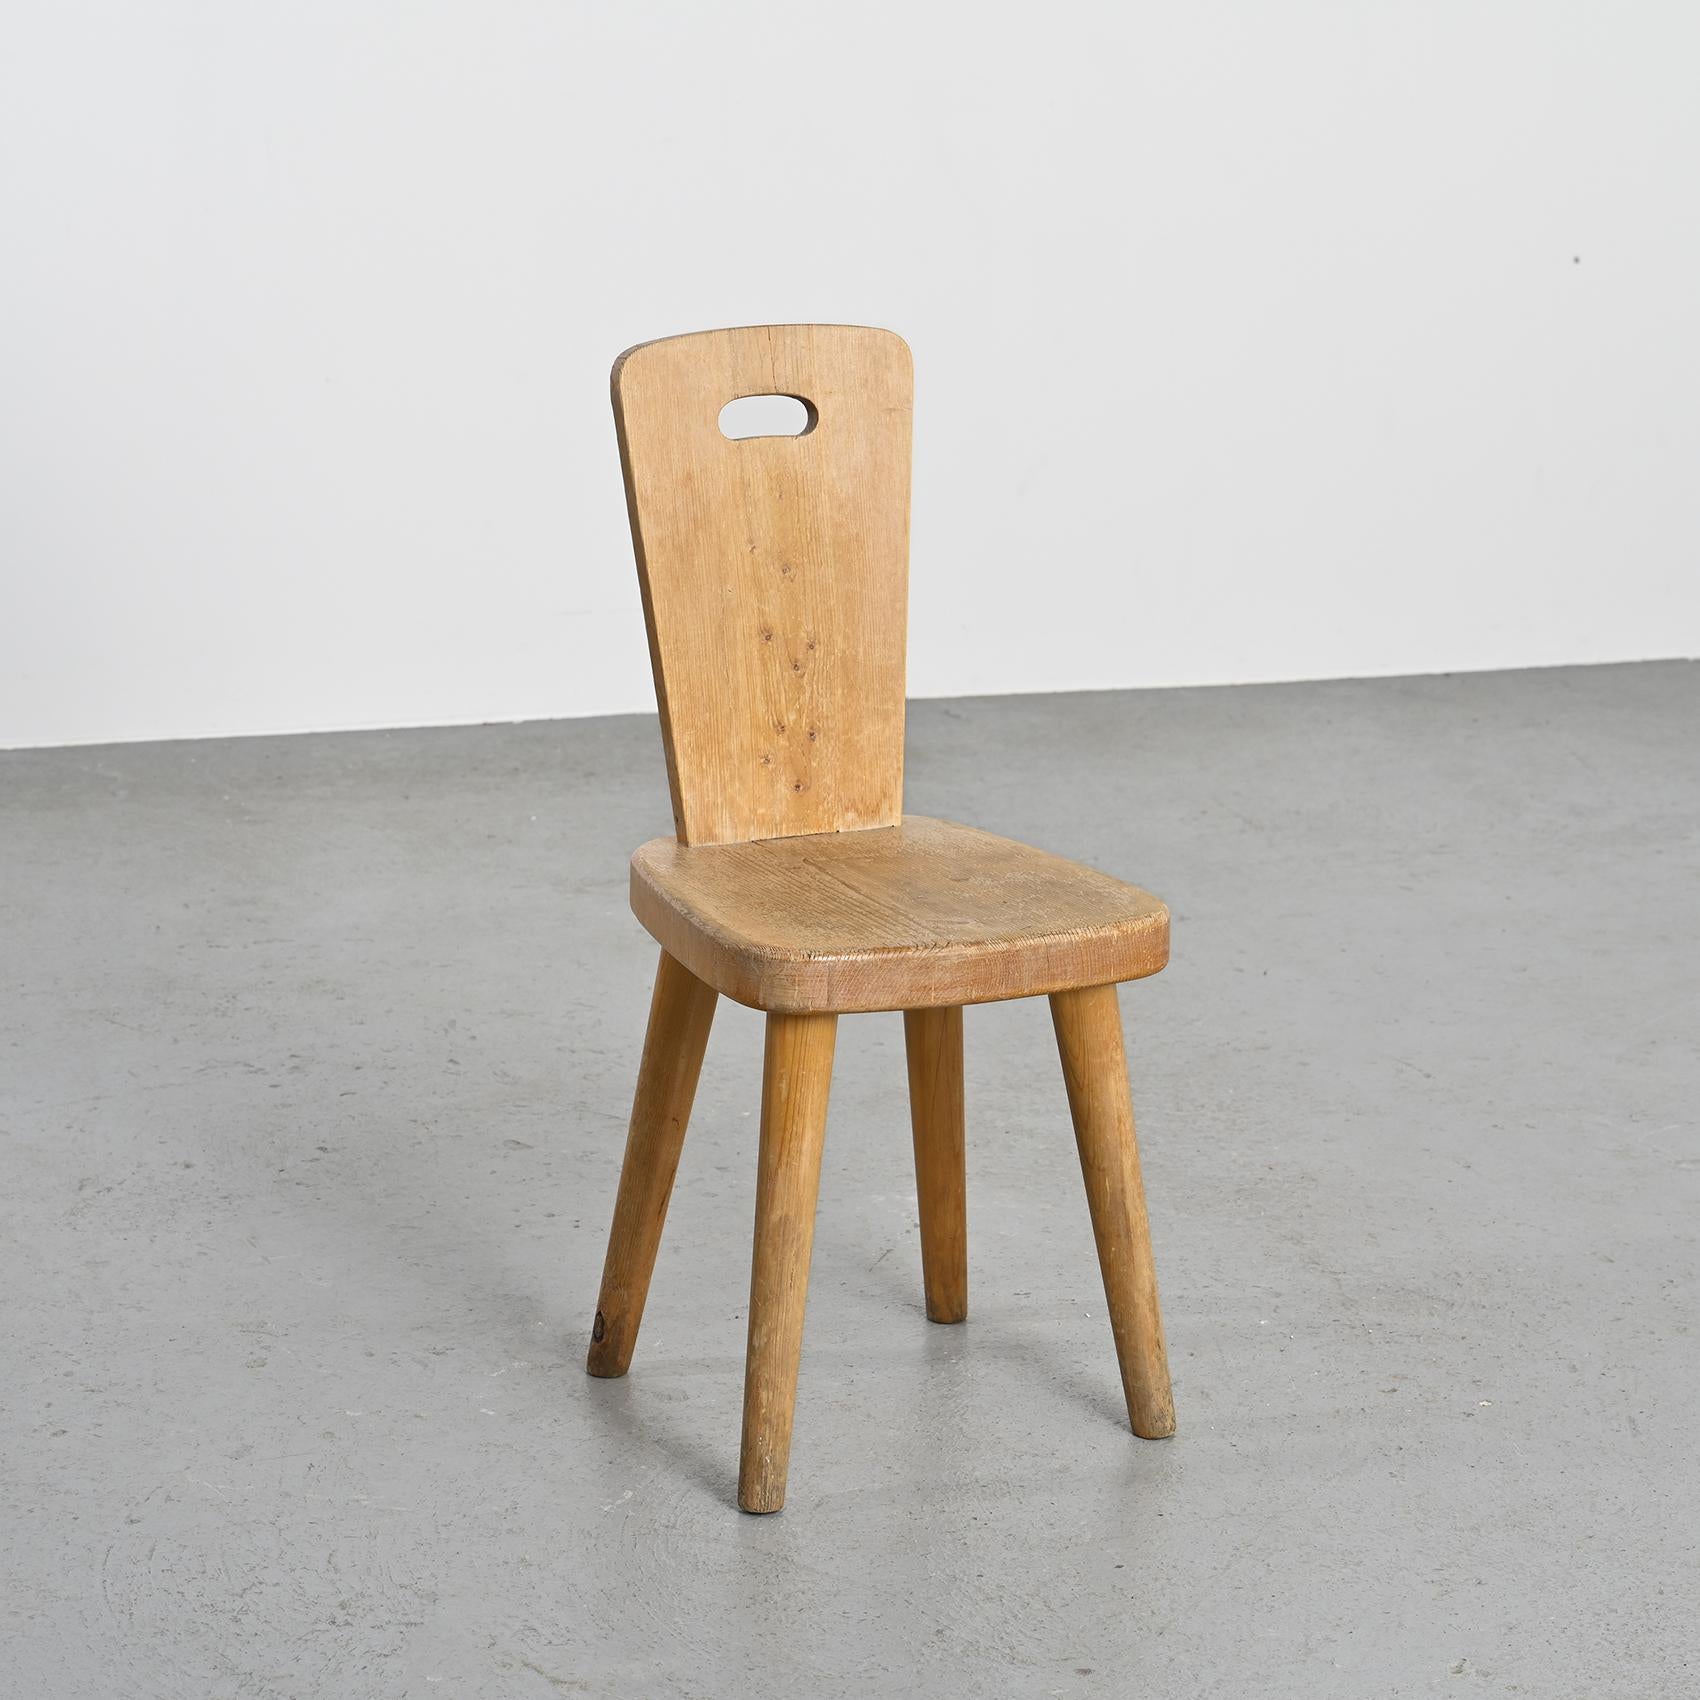 20th Century Solid Pine Chair by Christian Durupt, Meribel 1960 For Sale